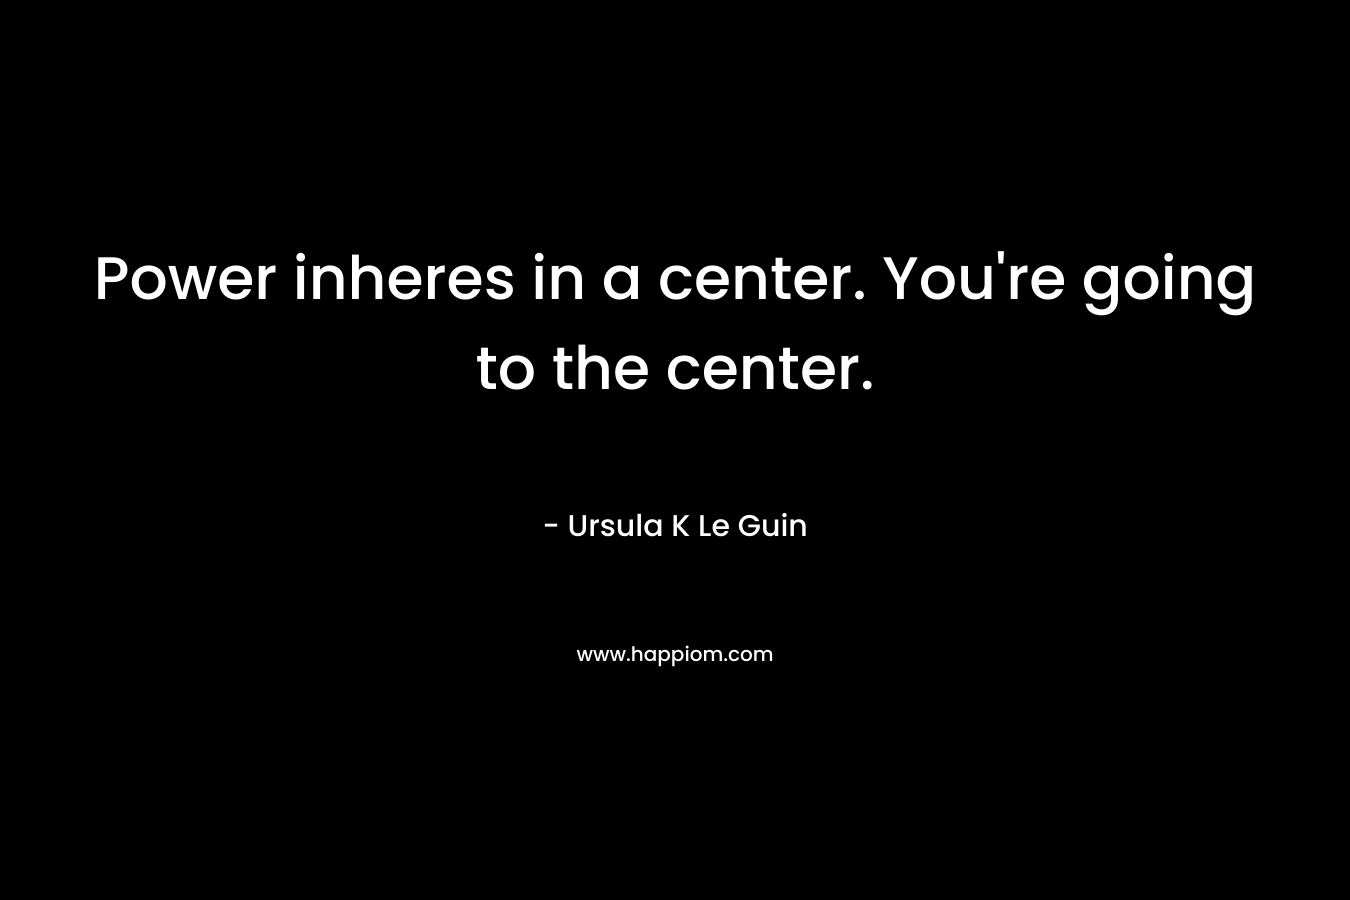 Power inheres in a center. You're going to the center.